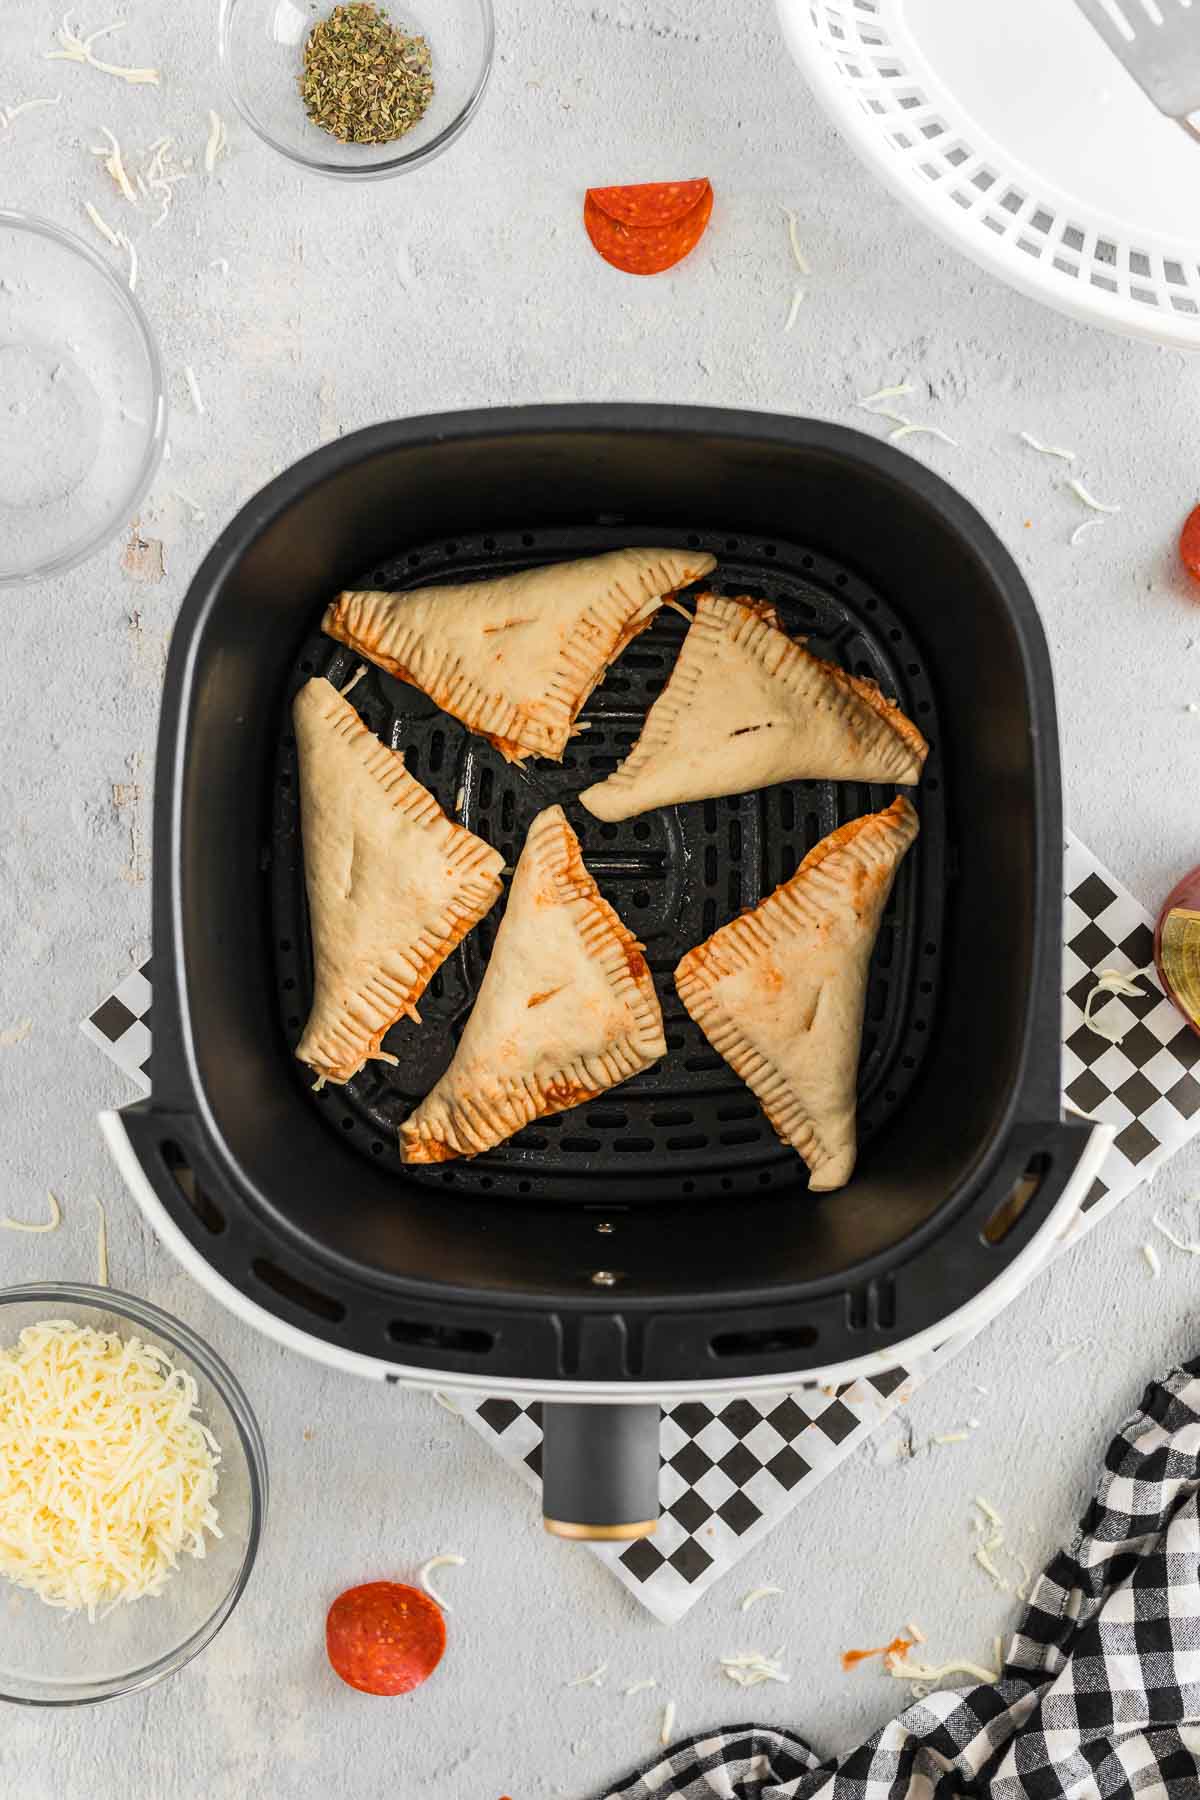 Air fryer hot pockets placed into air fryer basket.